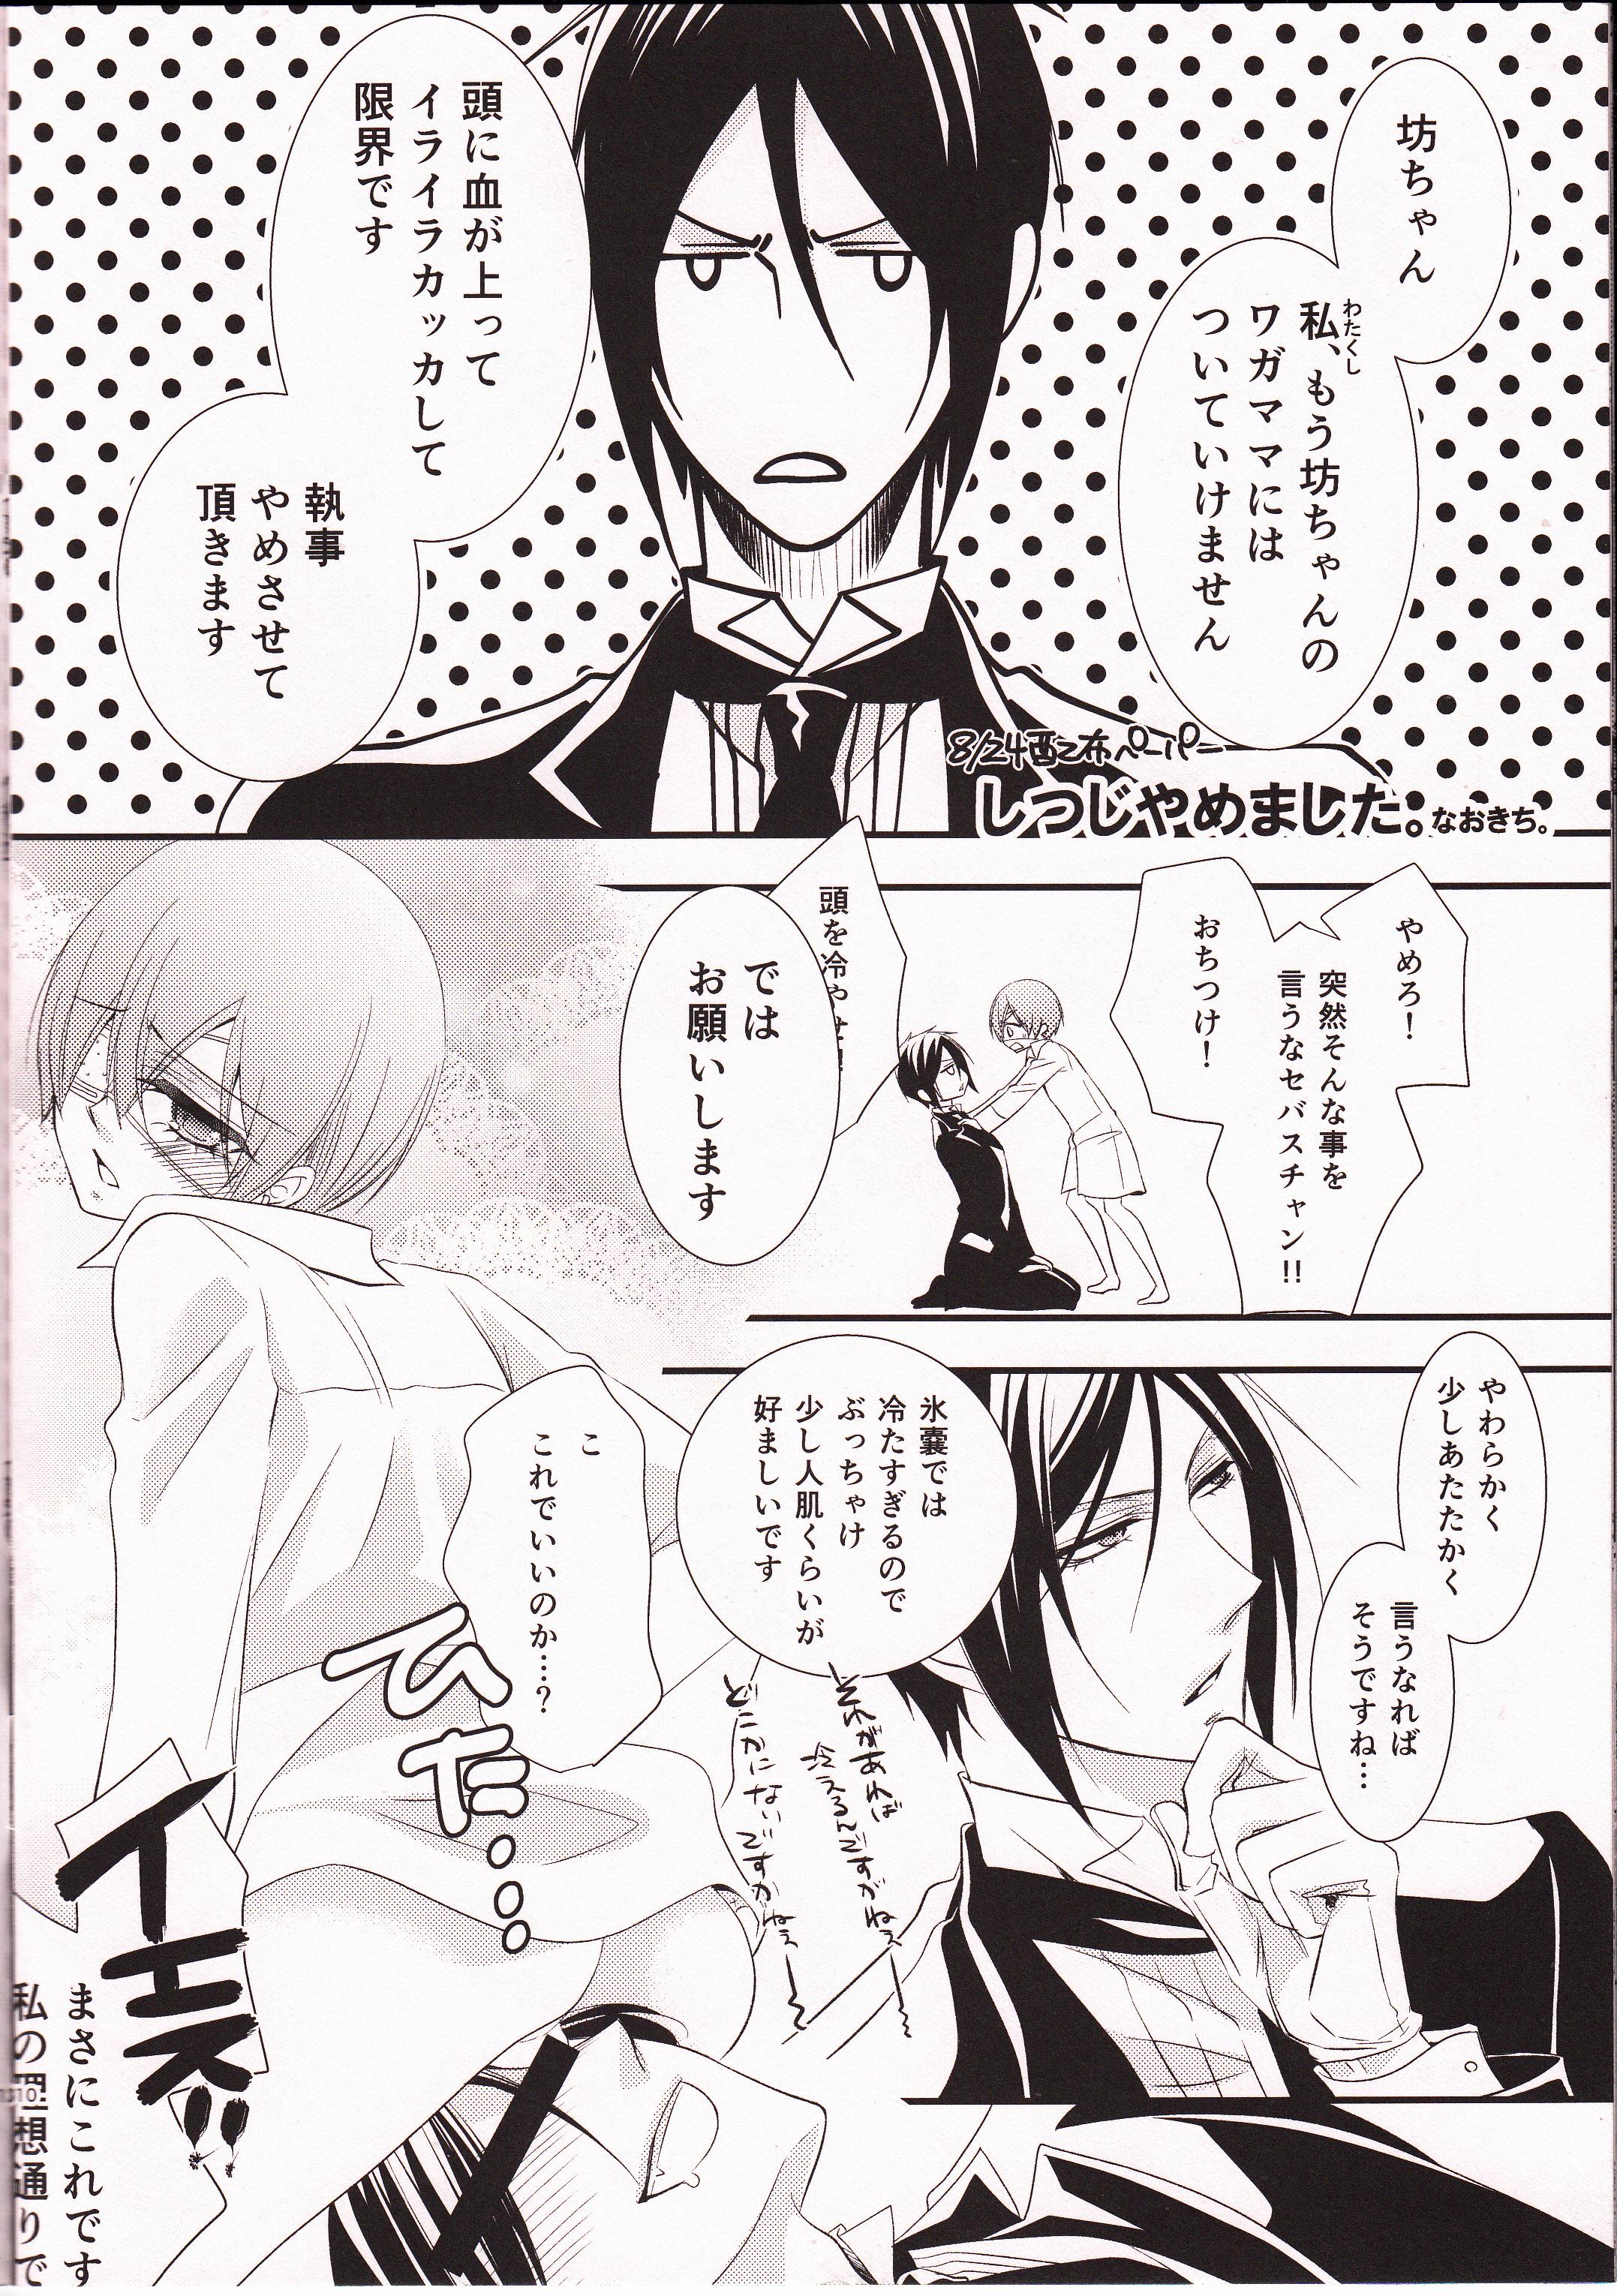 Titty Fuck C - Black butler Gostosa - Page 10